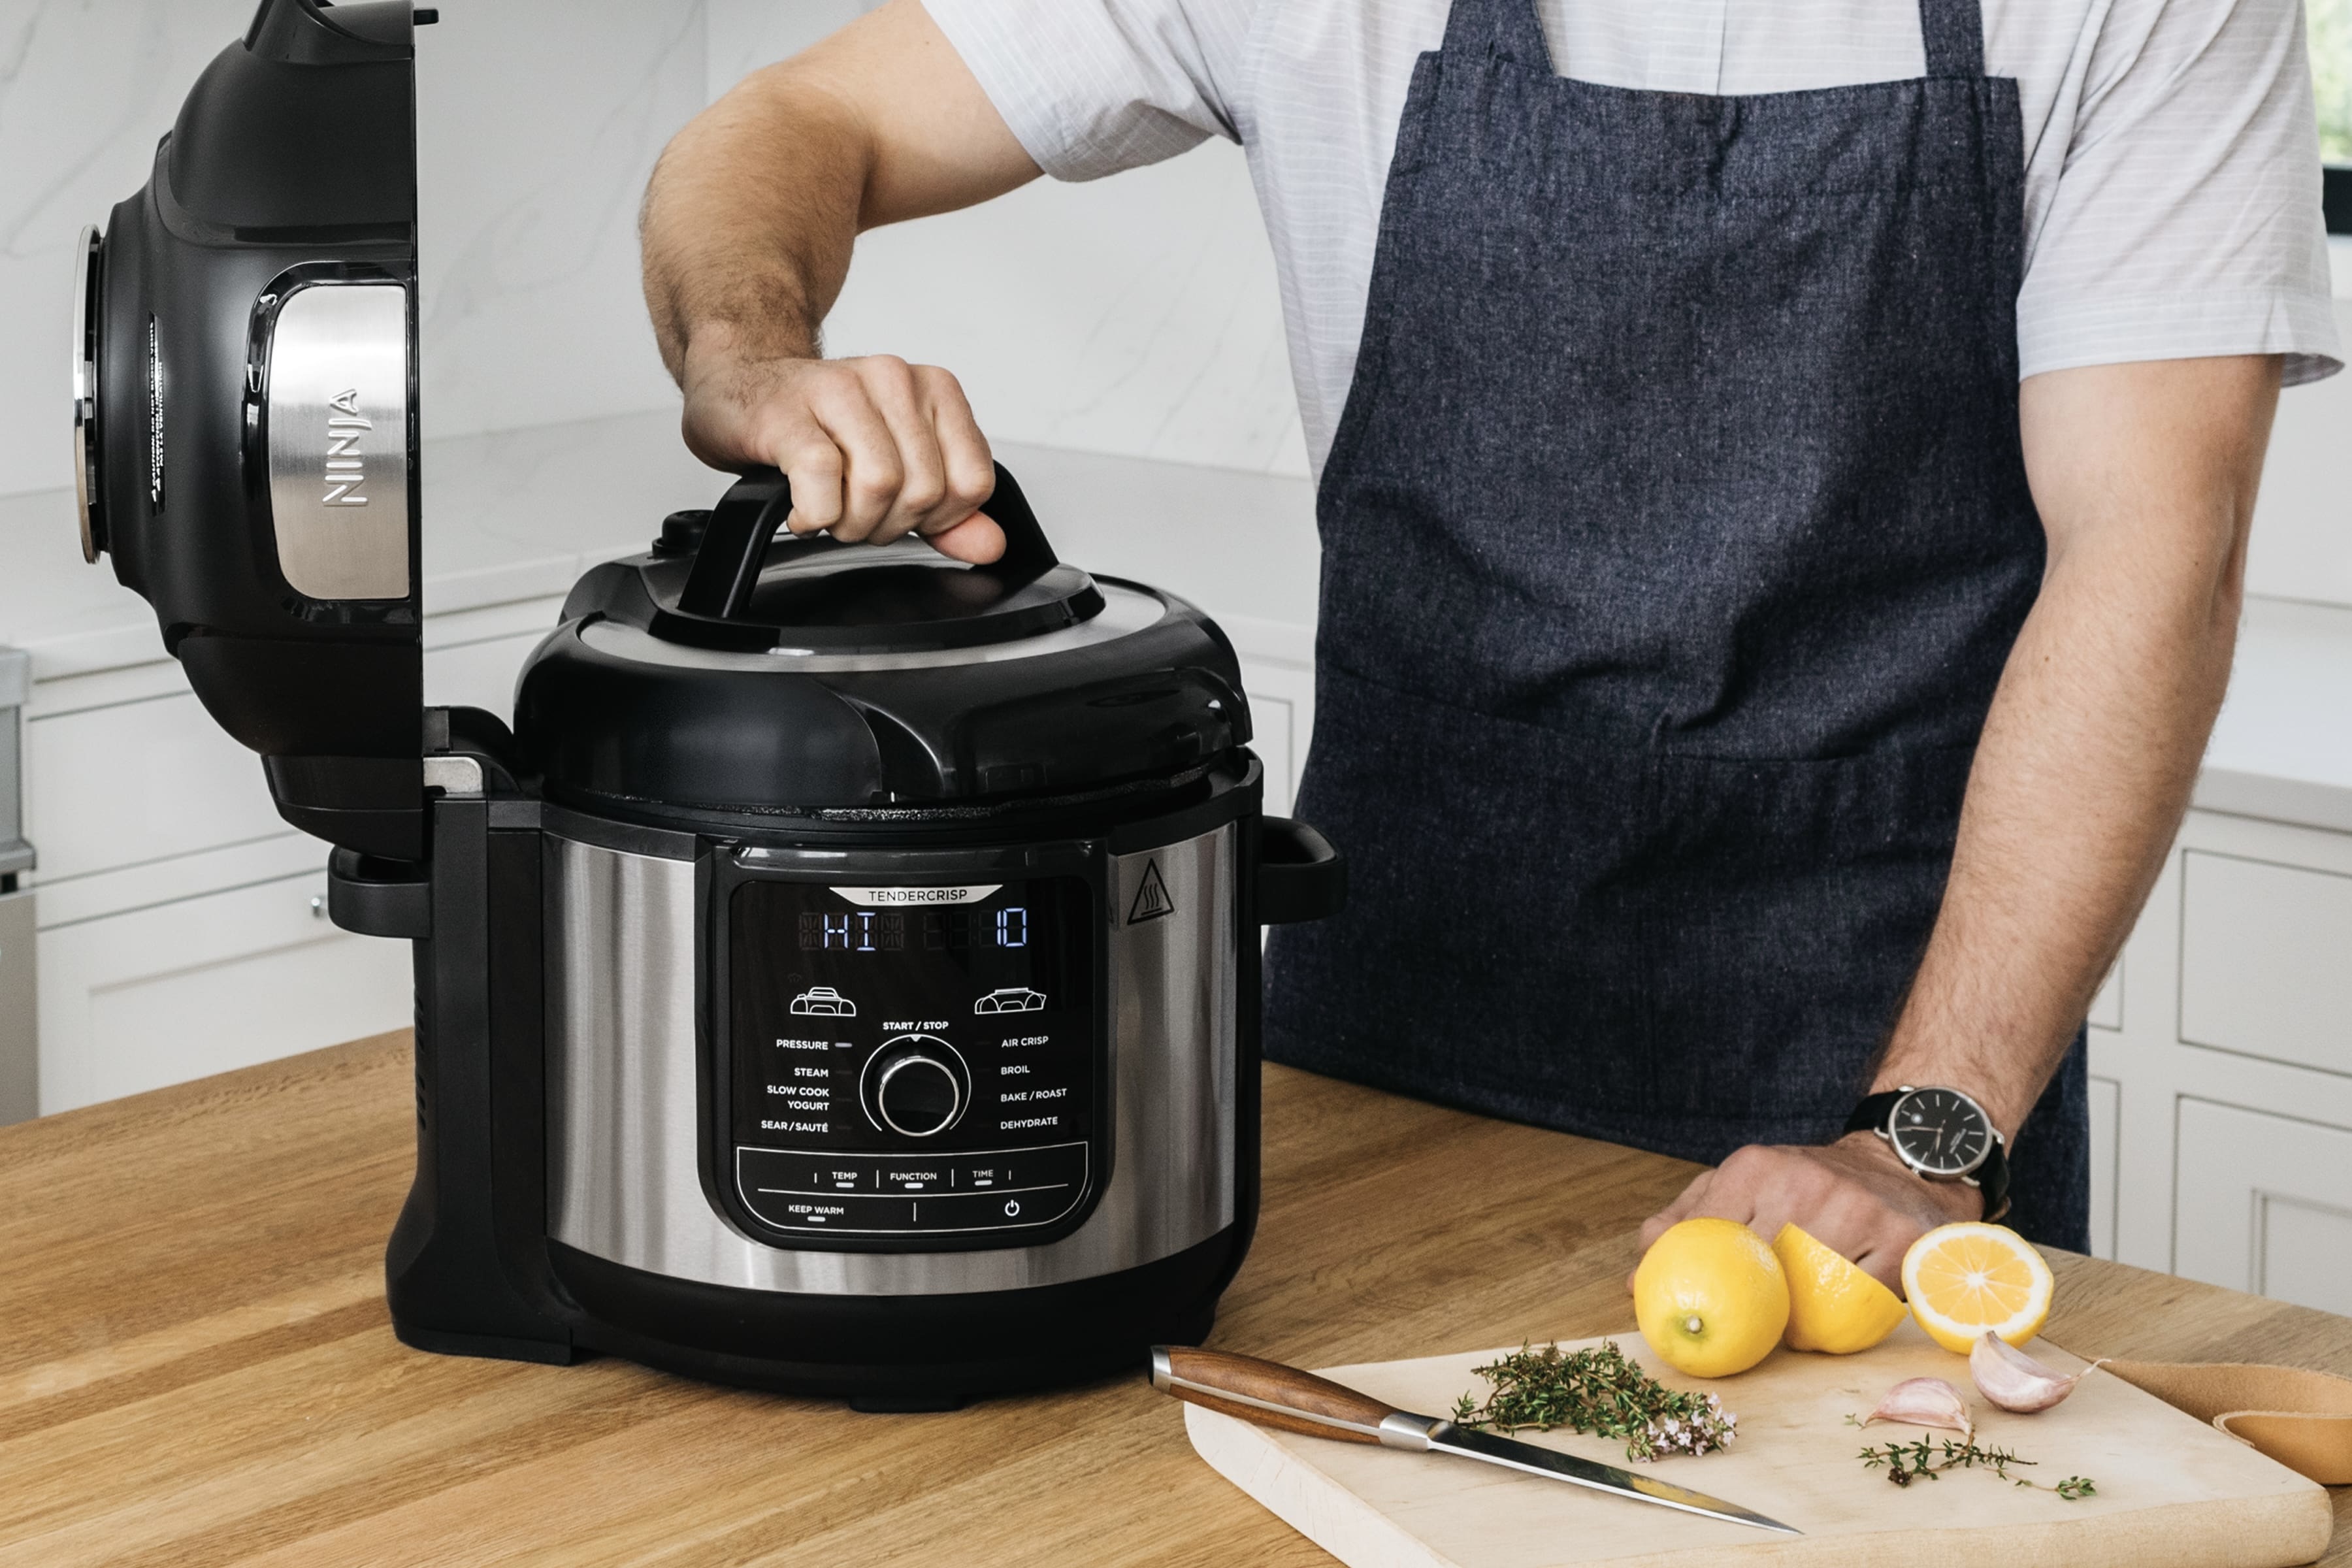 Ninja Foodi Pressure Cooker 9-in-1 Deluxe XL - Stainless Finish